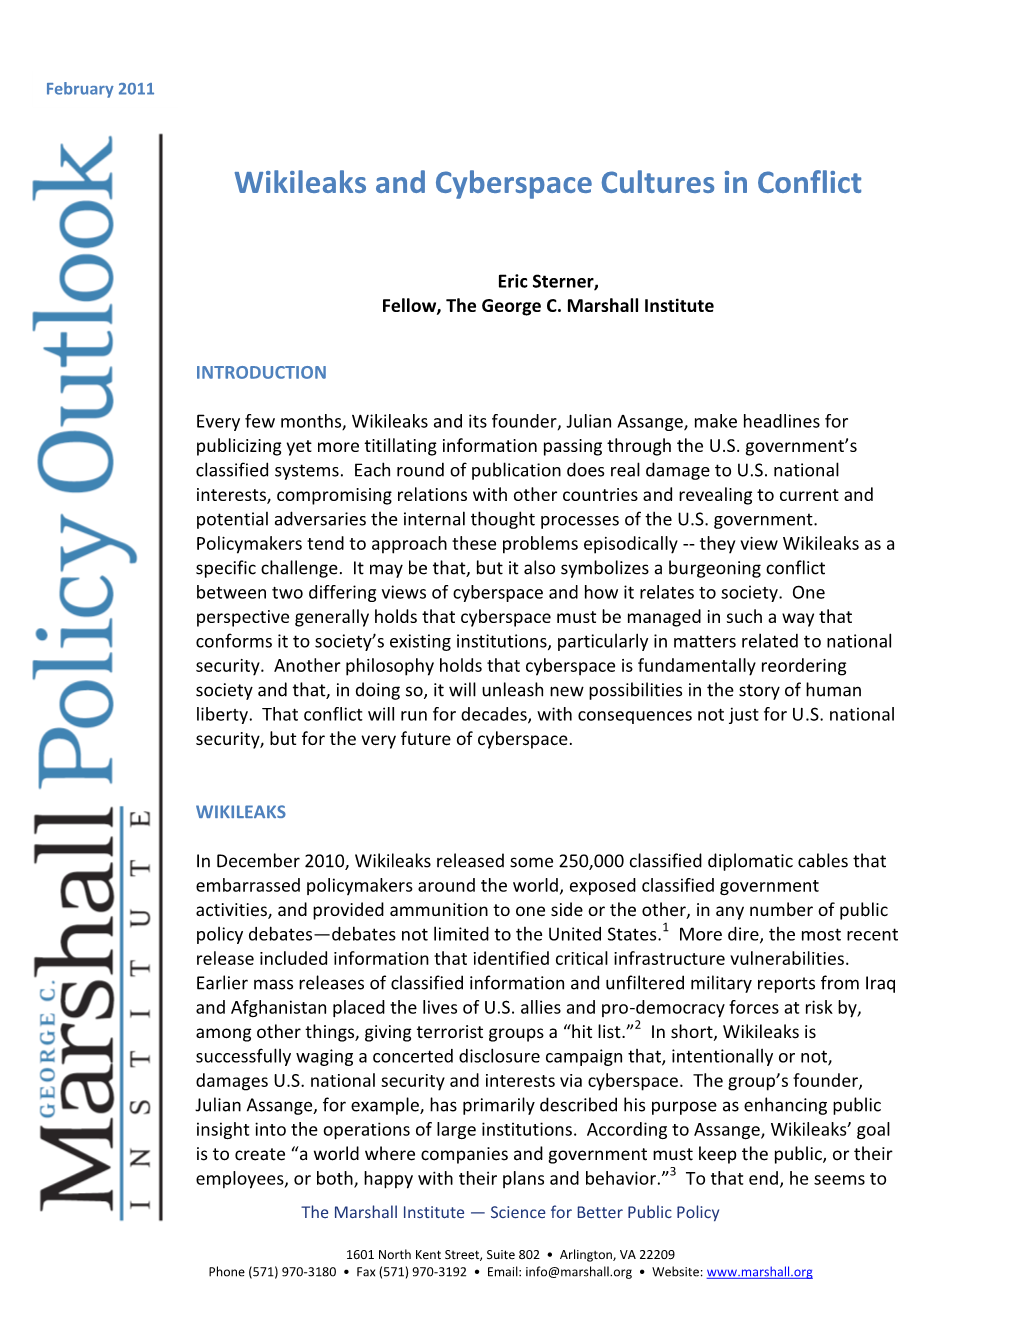 Wikileaks and Cyberspace Cultures in Conflict